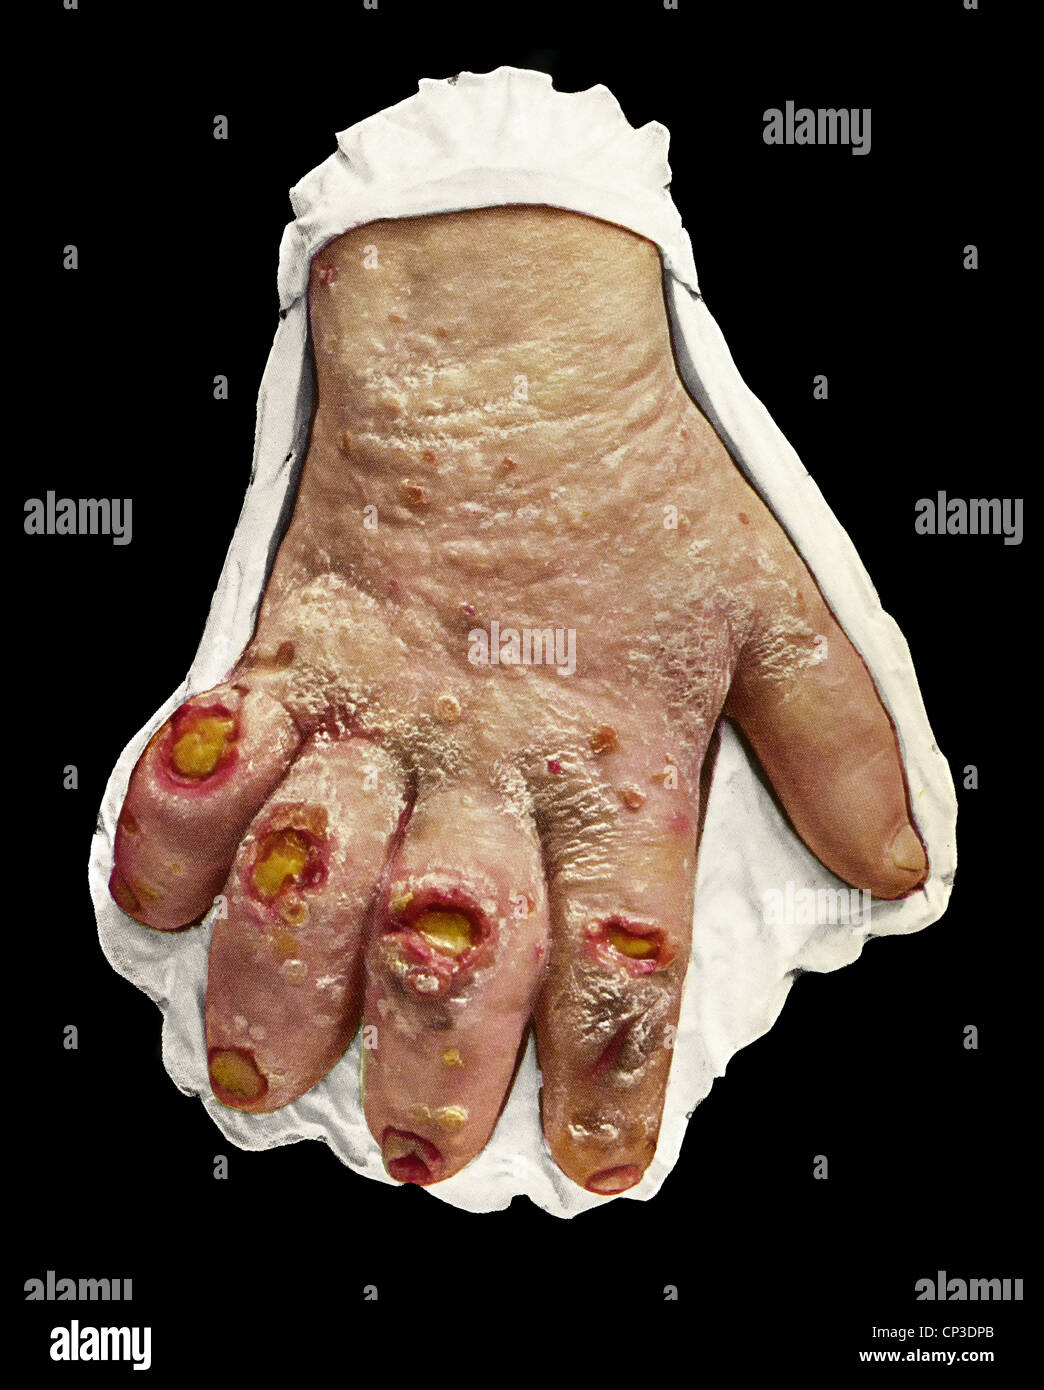 Moulage showing  Leper tuberculosis, prepared wax anatomical model for educational purposes of dermatologists Stock Photo